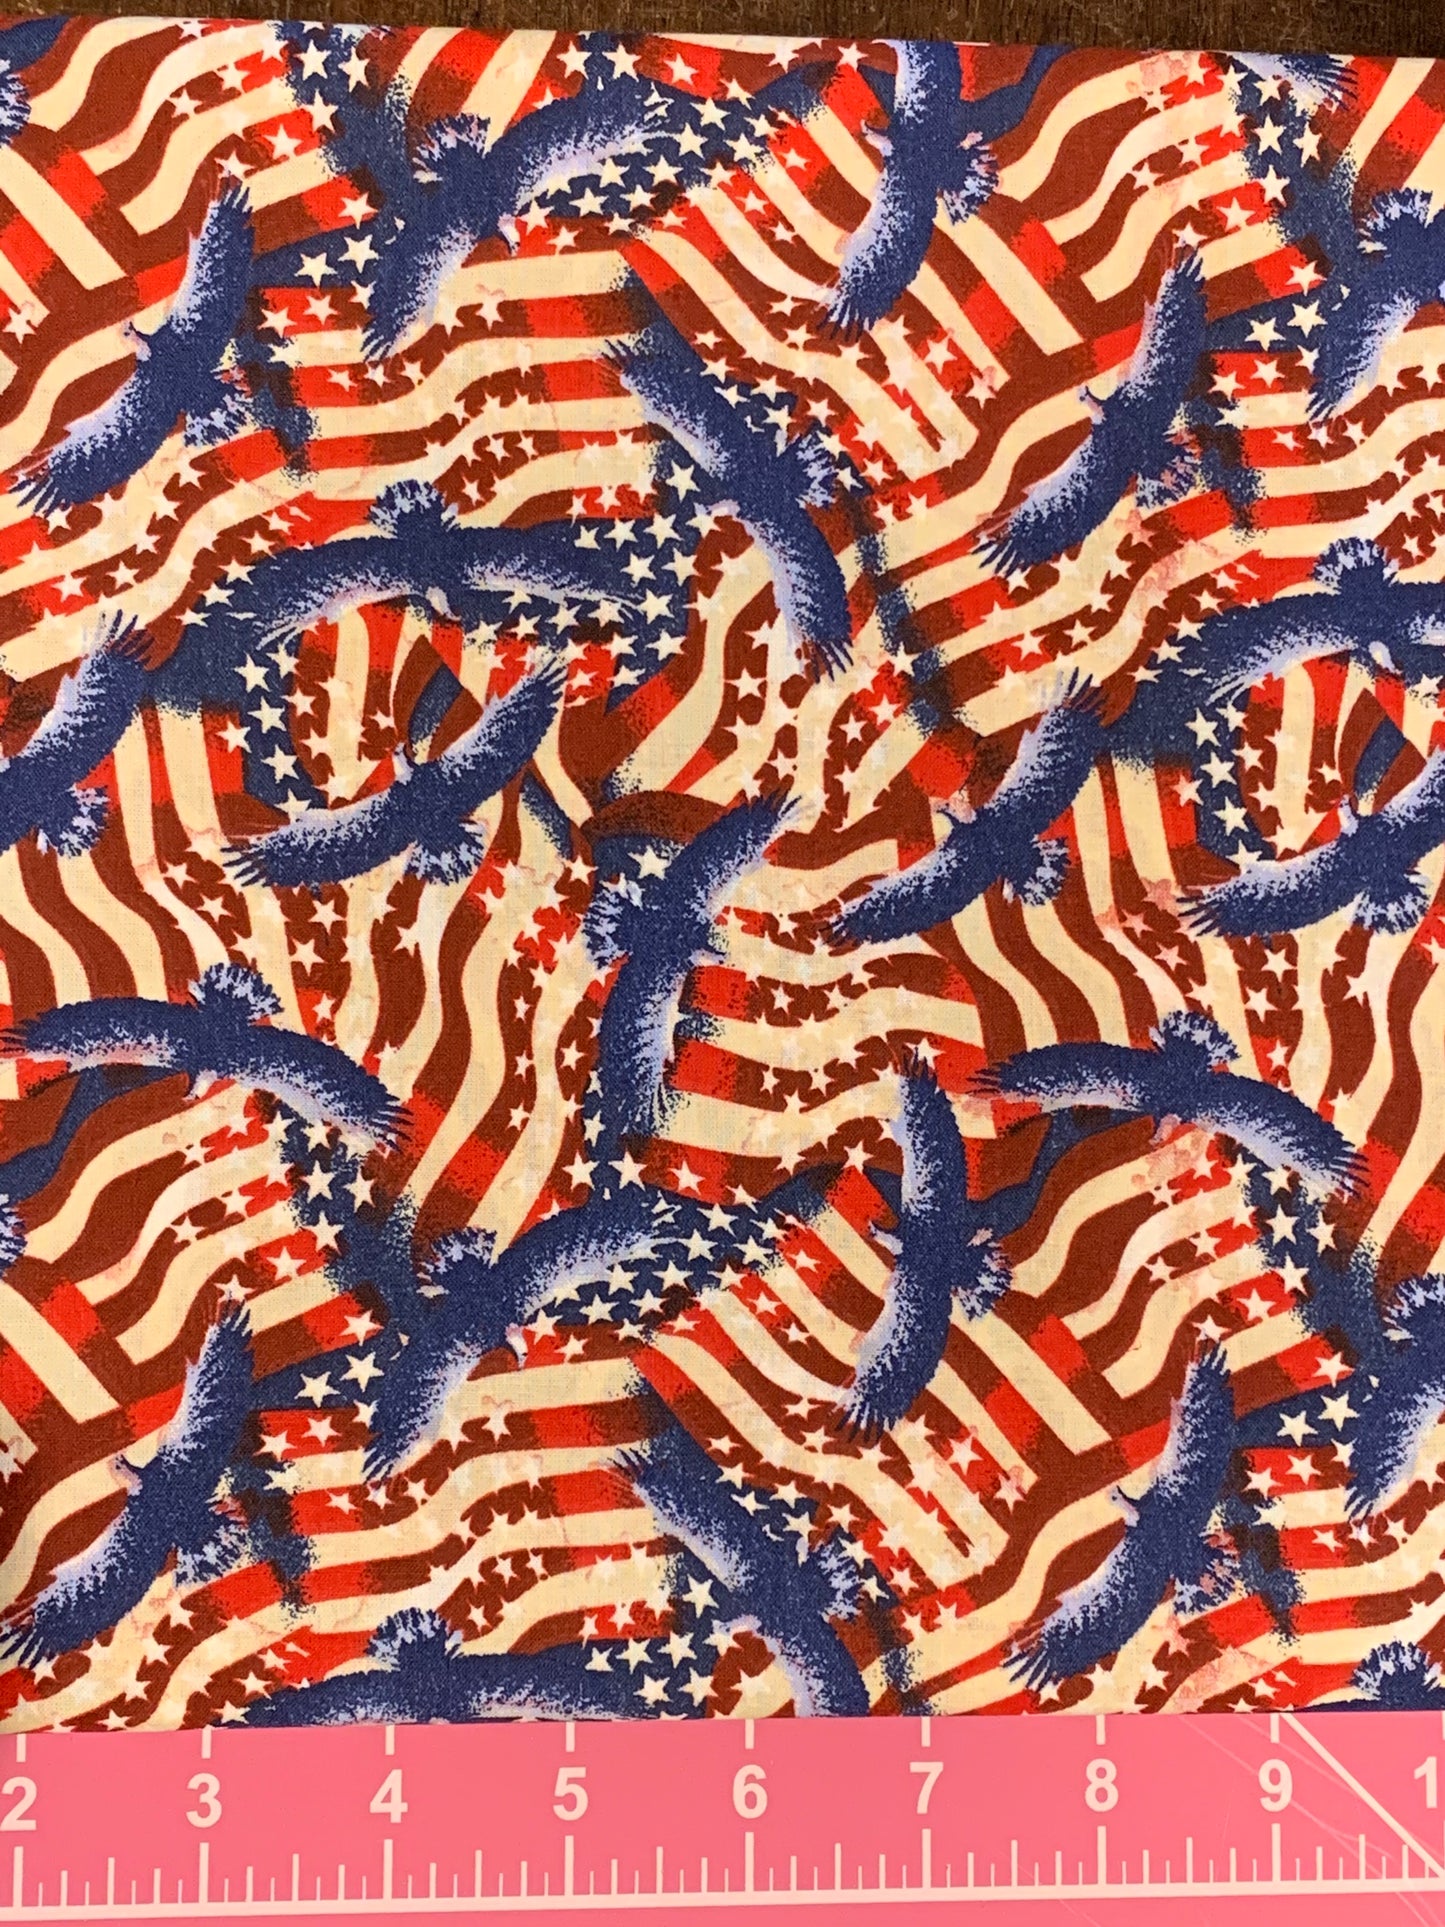 Cotton Fabric - Patriotic Americana - Flags & Eagles - Beachside Knits N Quilts